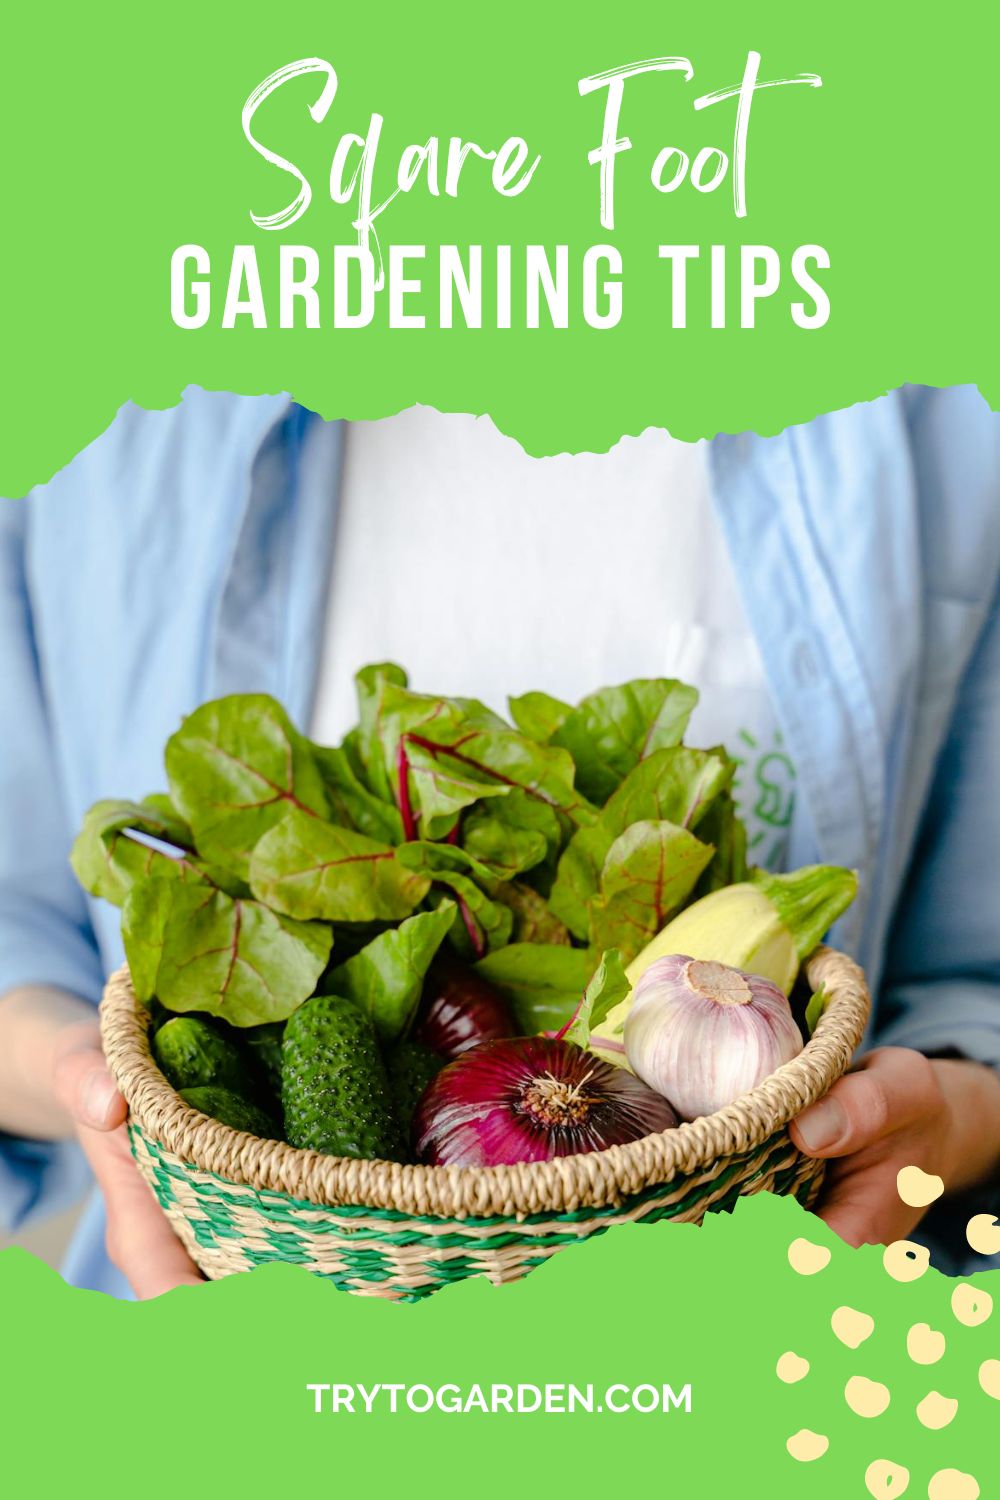 Wondering how to get started with square foot gardening? Check out these tips and best plants for square foot gardening.